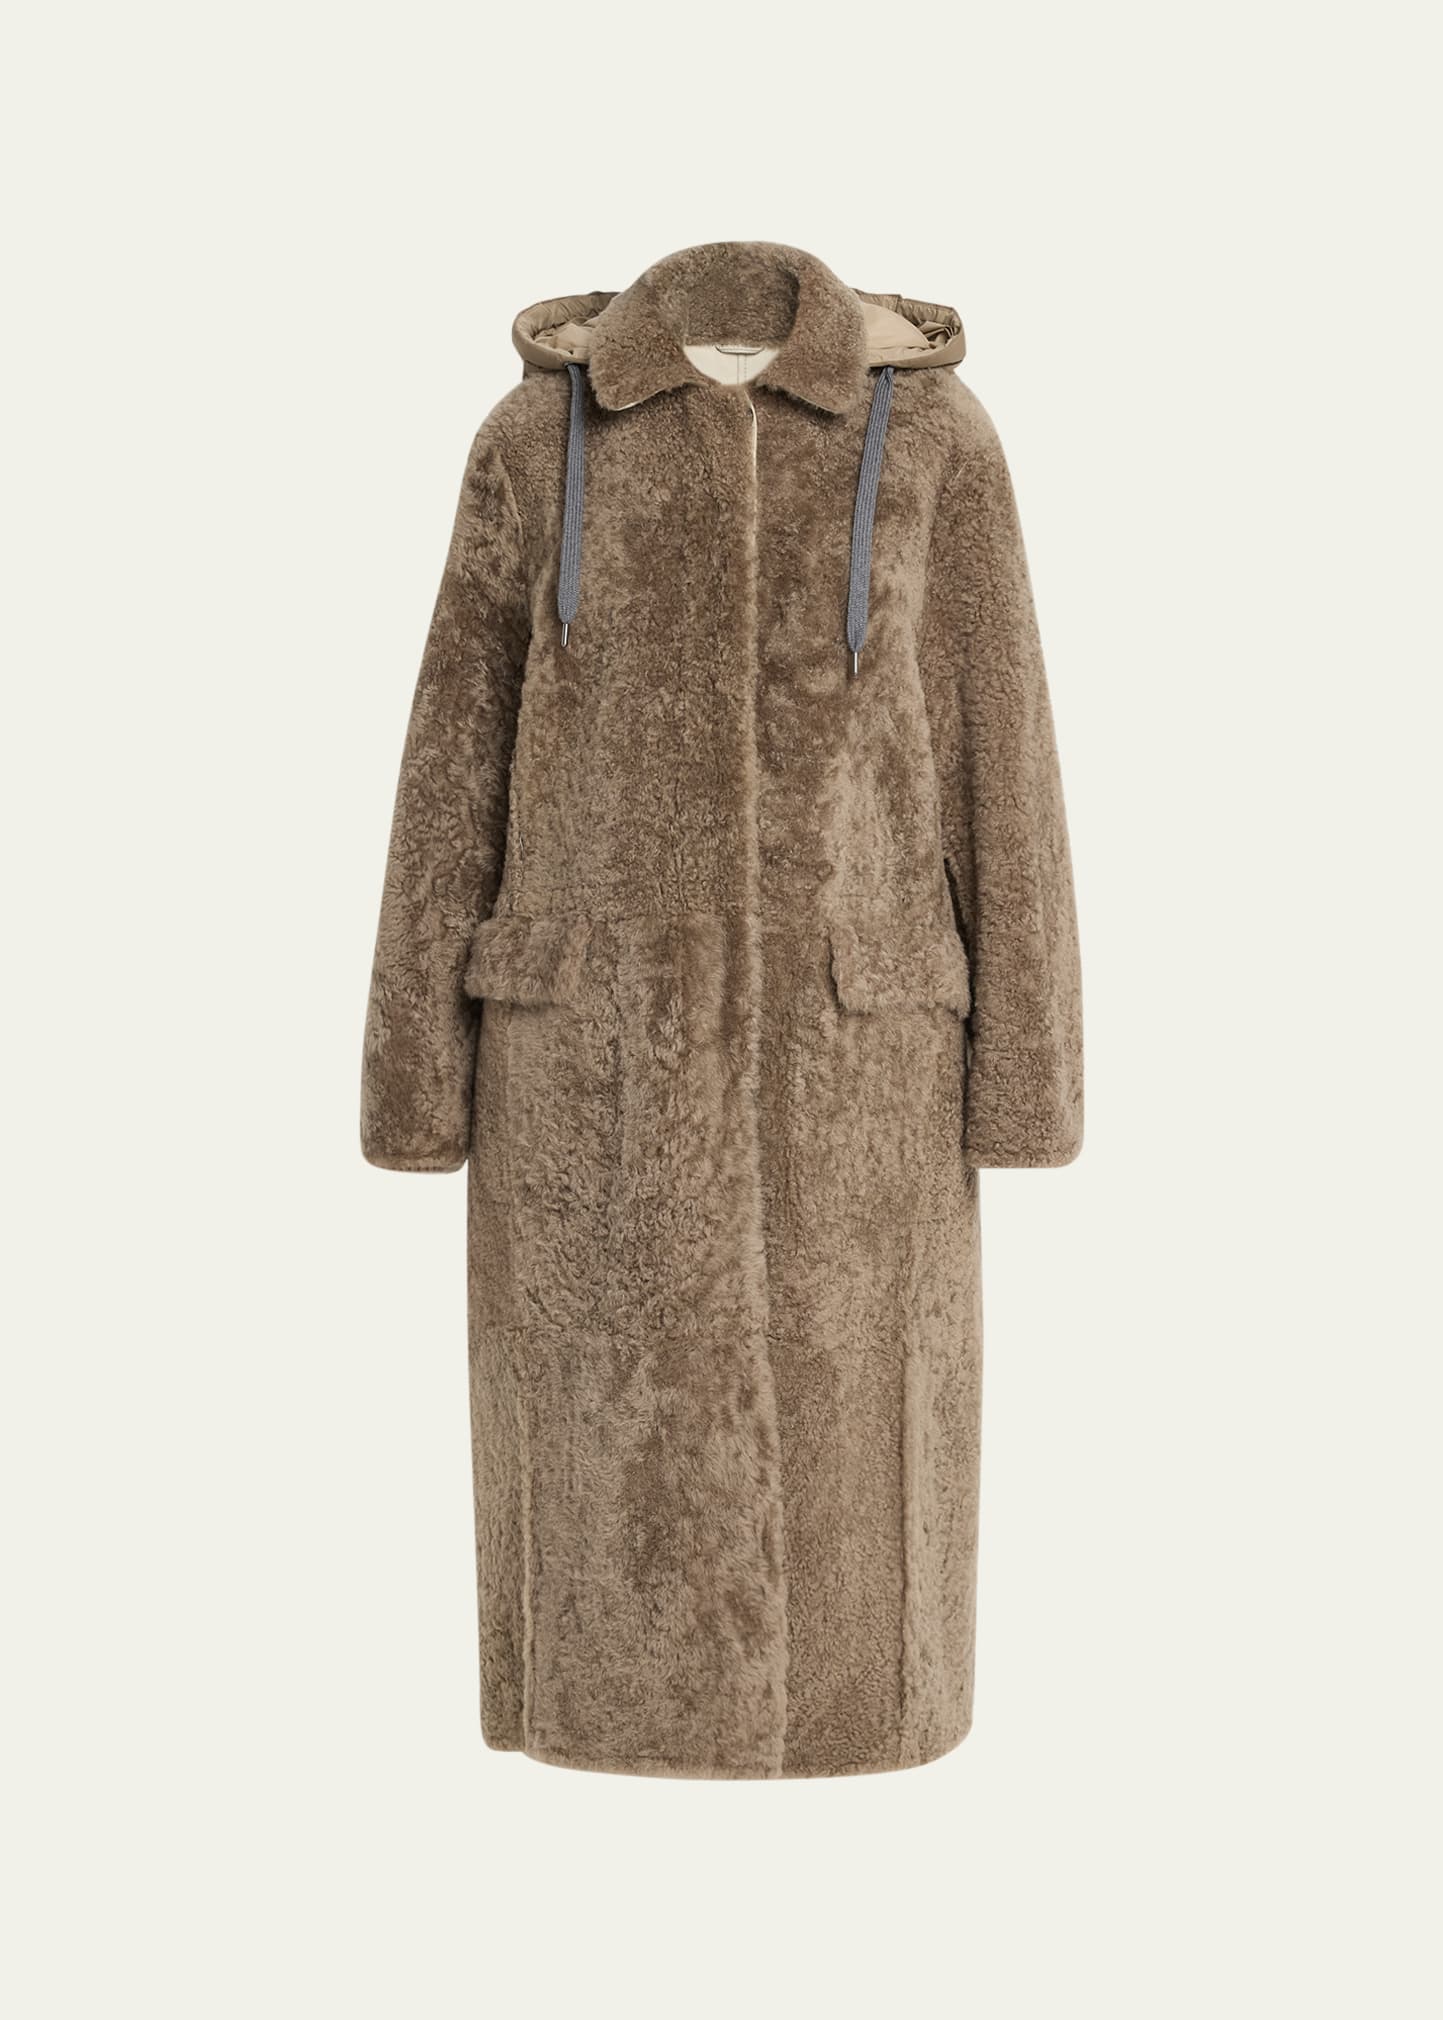 BRUNELLO CUCINELLI SHEARLING LONG COAT WITH DETACHABLE DRAWSTRING HOOD